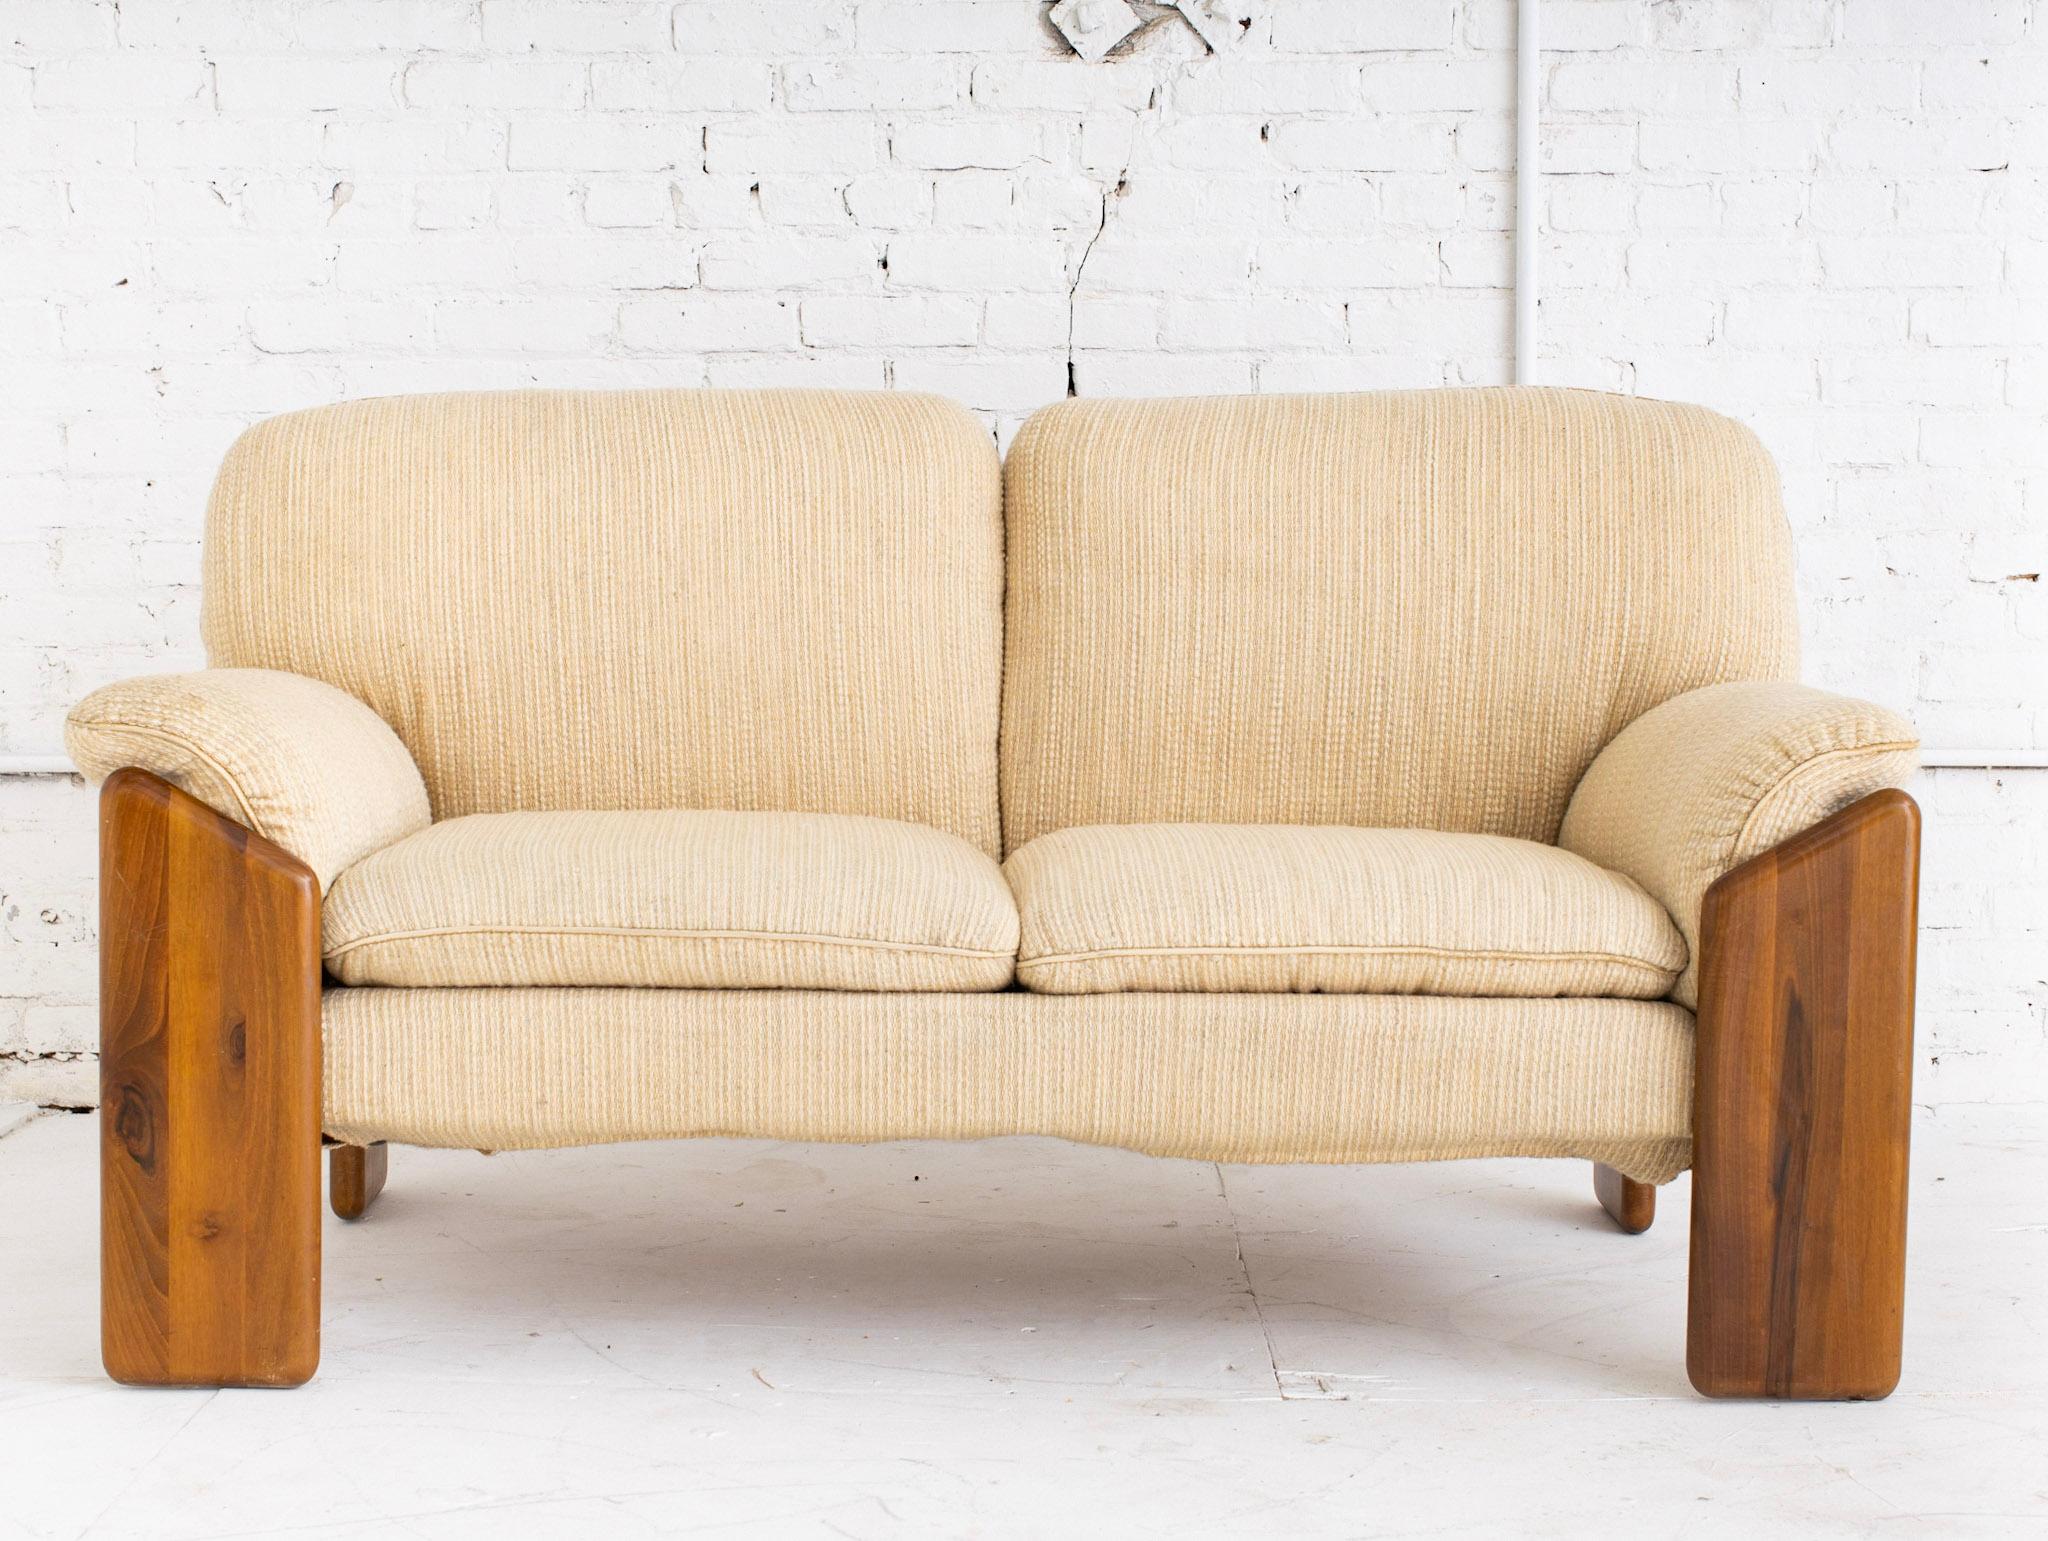 Solid wood frame sofa by Mario Marenco (1933 - 2019) for Mobil Girgi. Original textured beige wool upholstery.

Born in Foggia, Italy, Marenco fostered successful careers in both comedy and design. Marenco studied architecture in Naples and soon